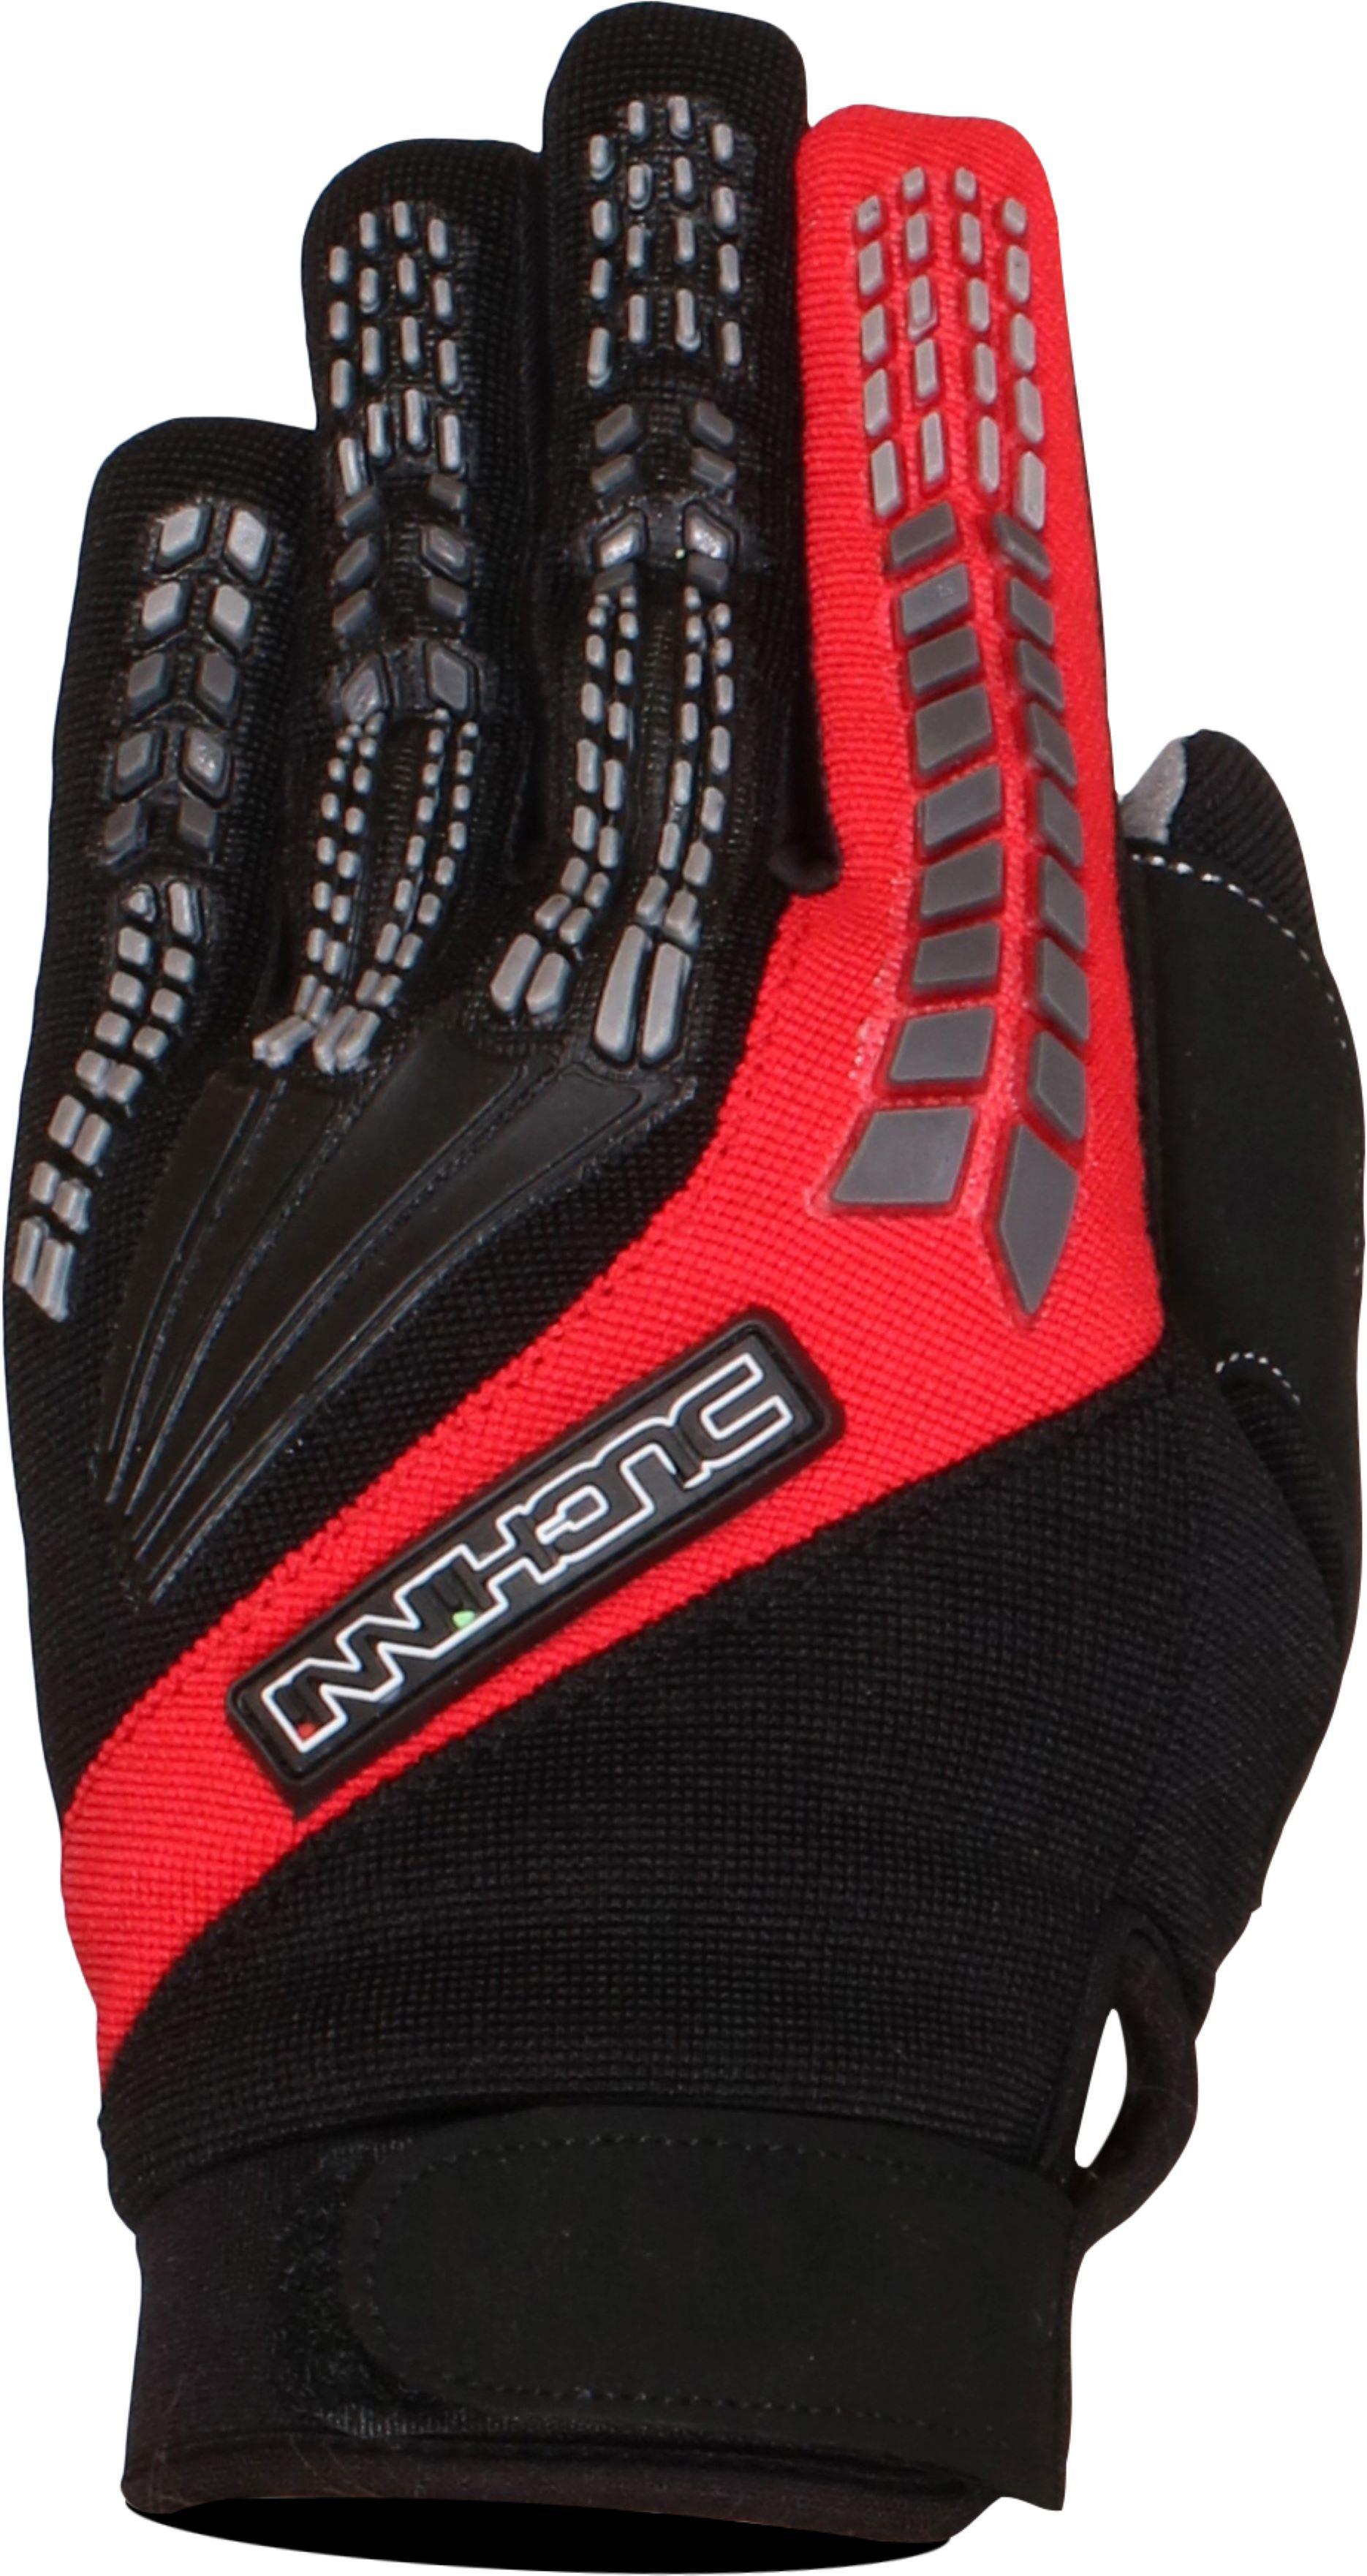 Duchinni Focus Motorcycle Gloves - Black And Red, Xl